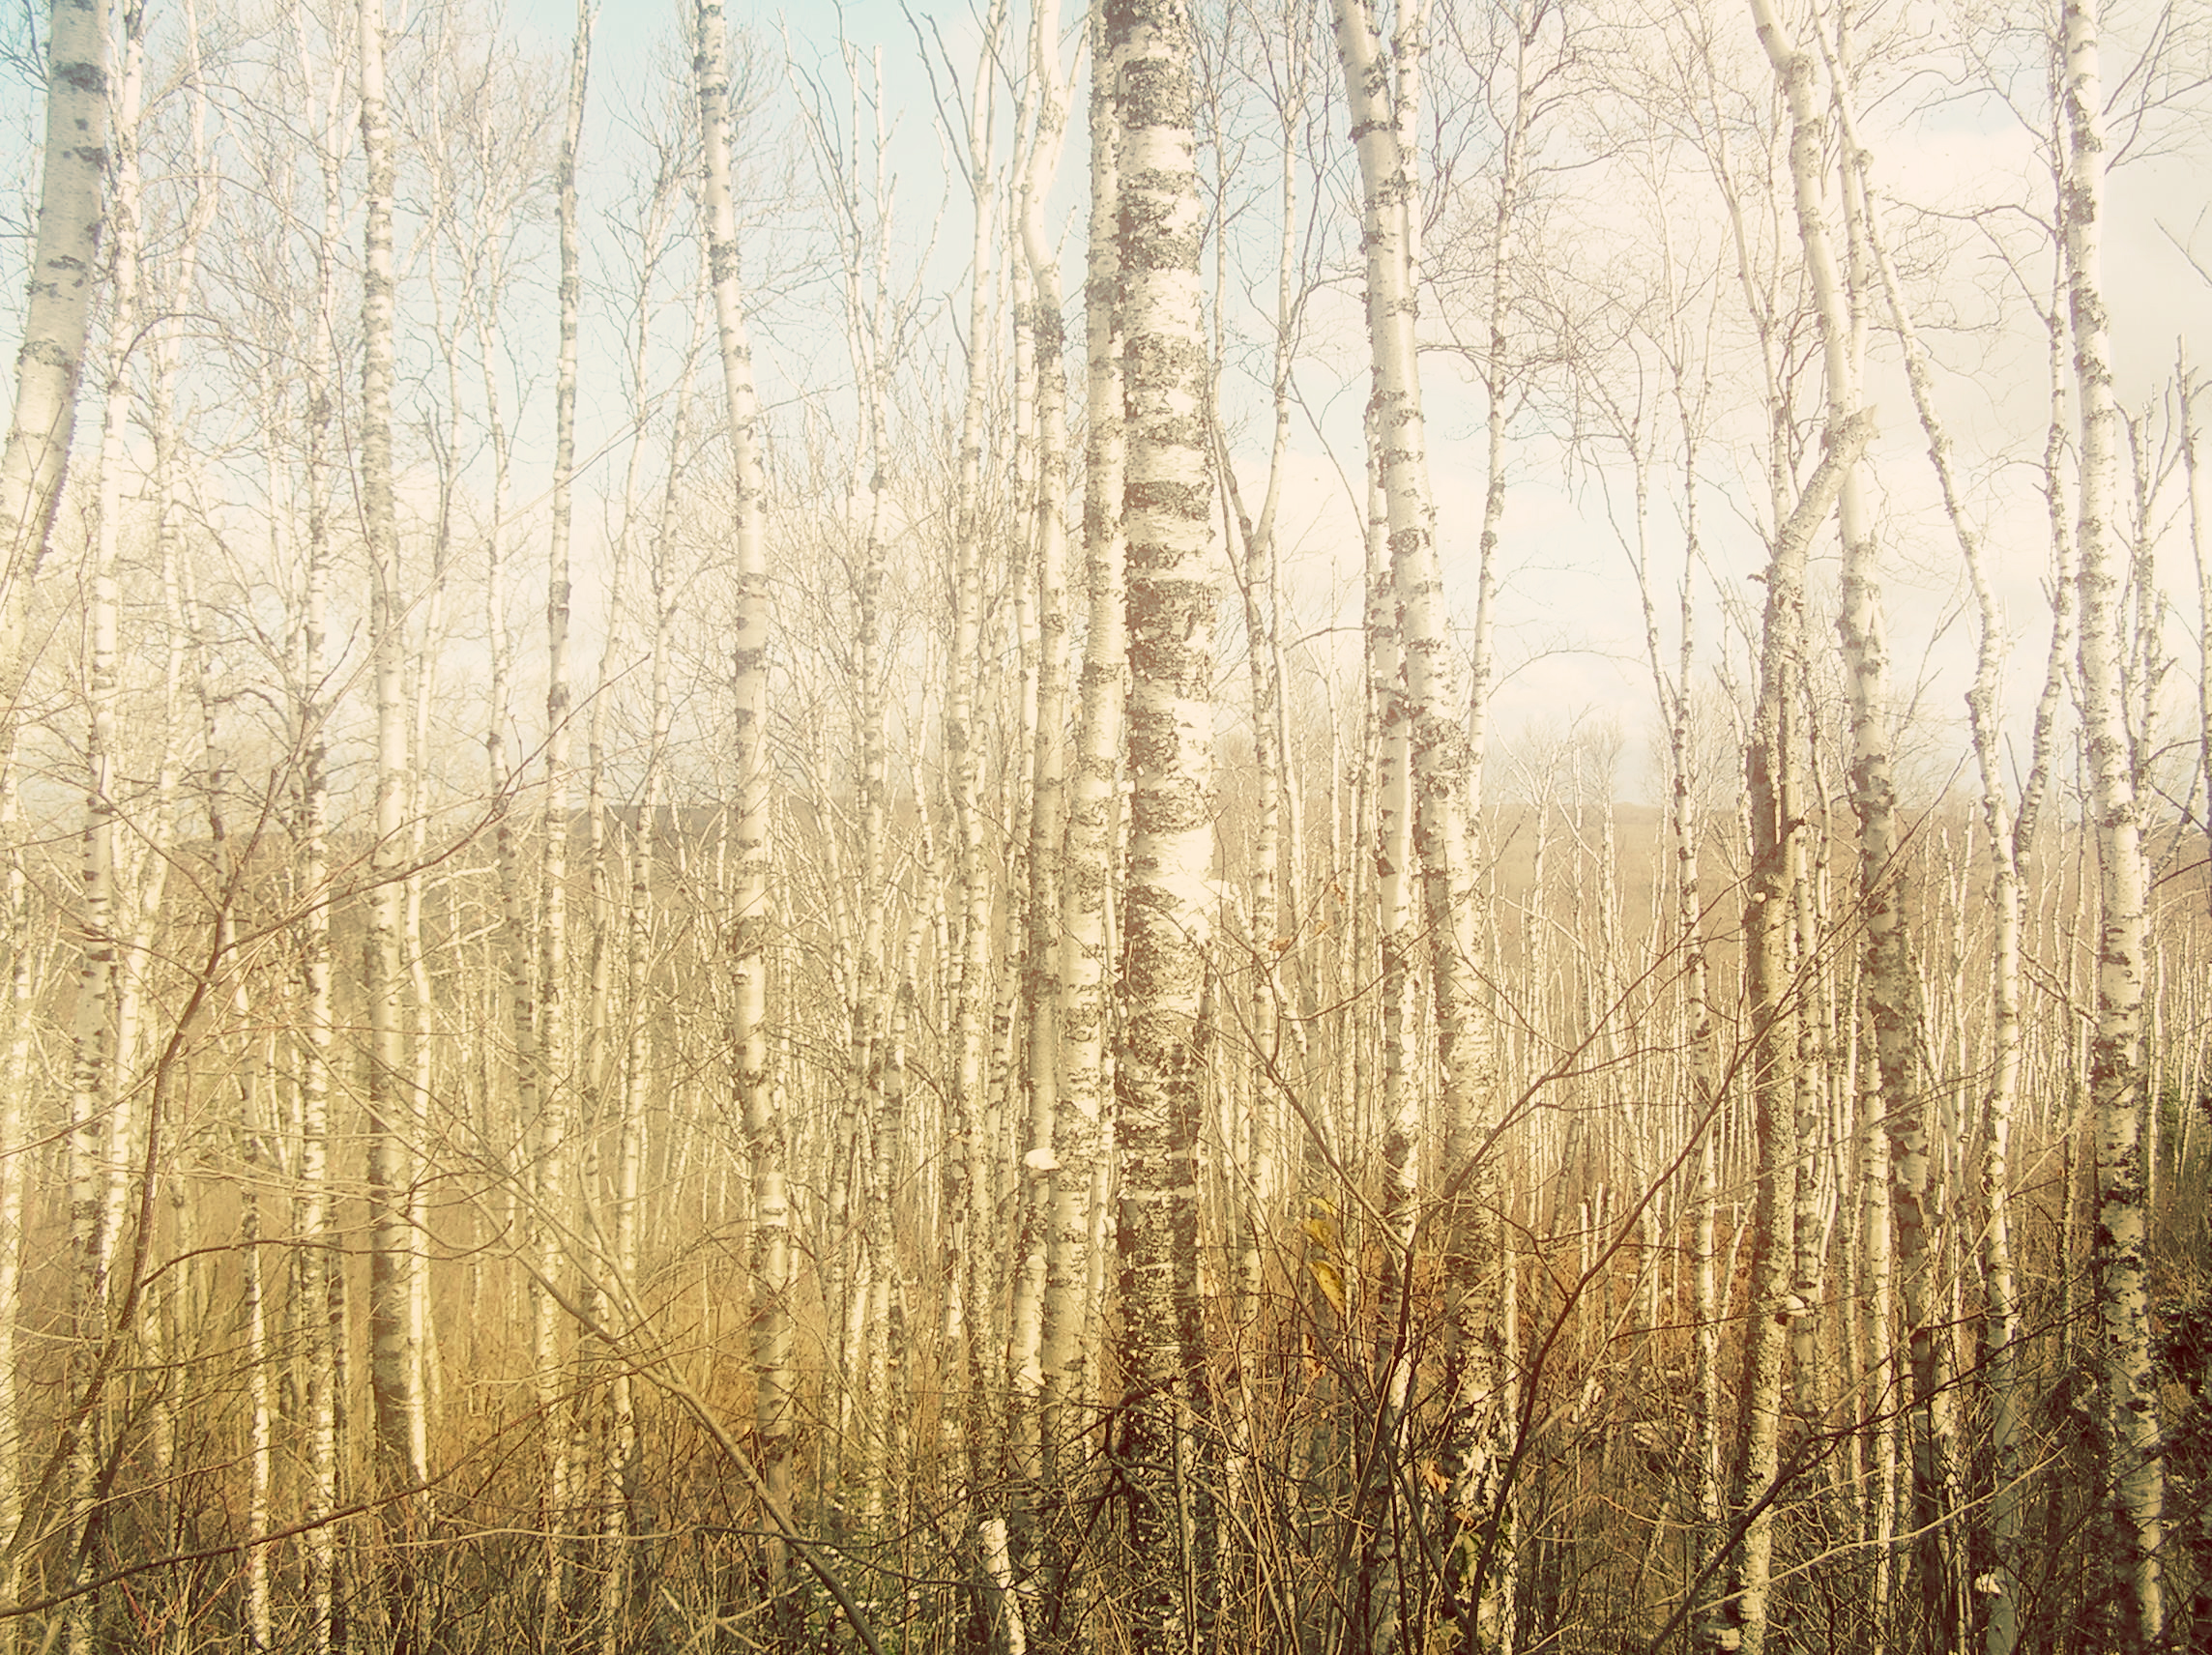 Text by: Robert Frost (BIRCHES